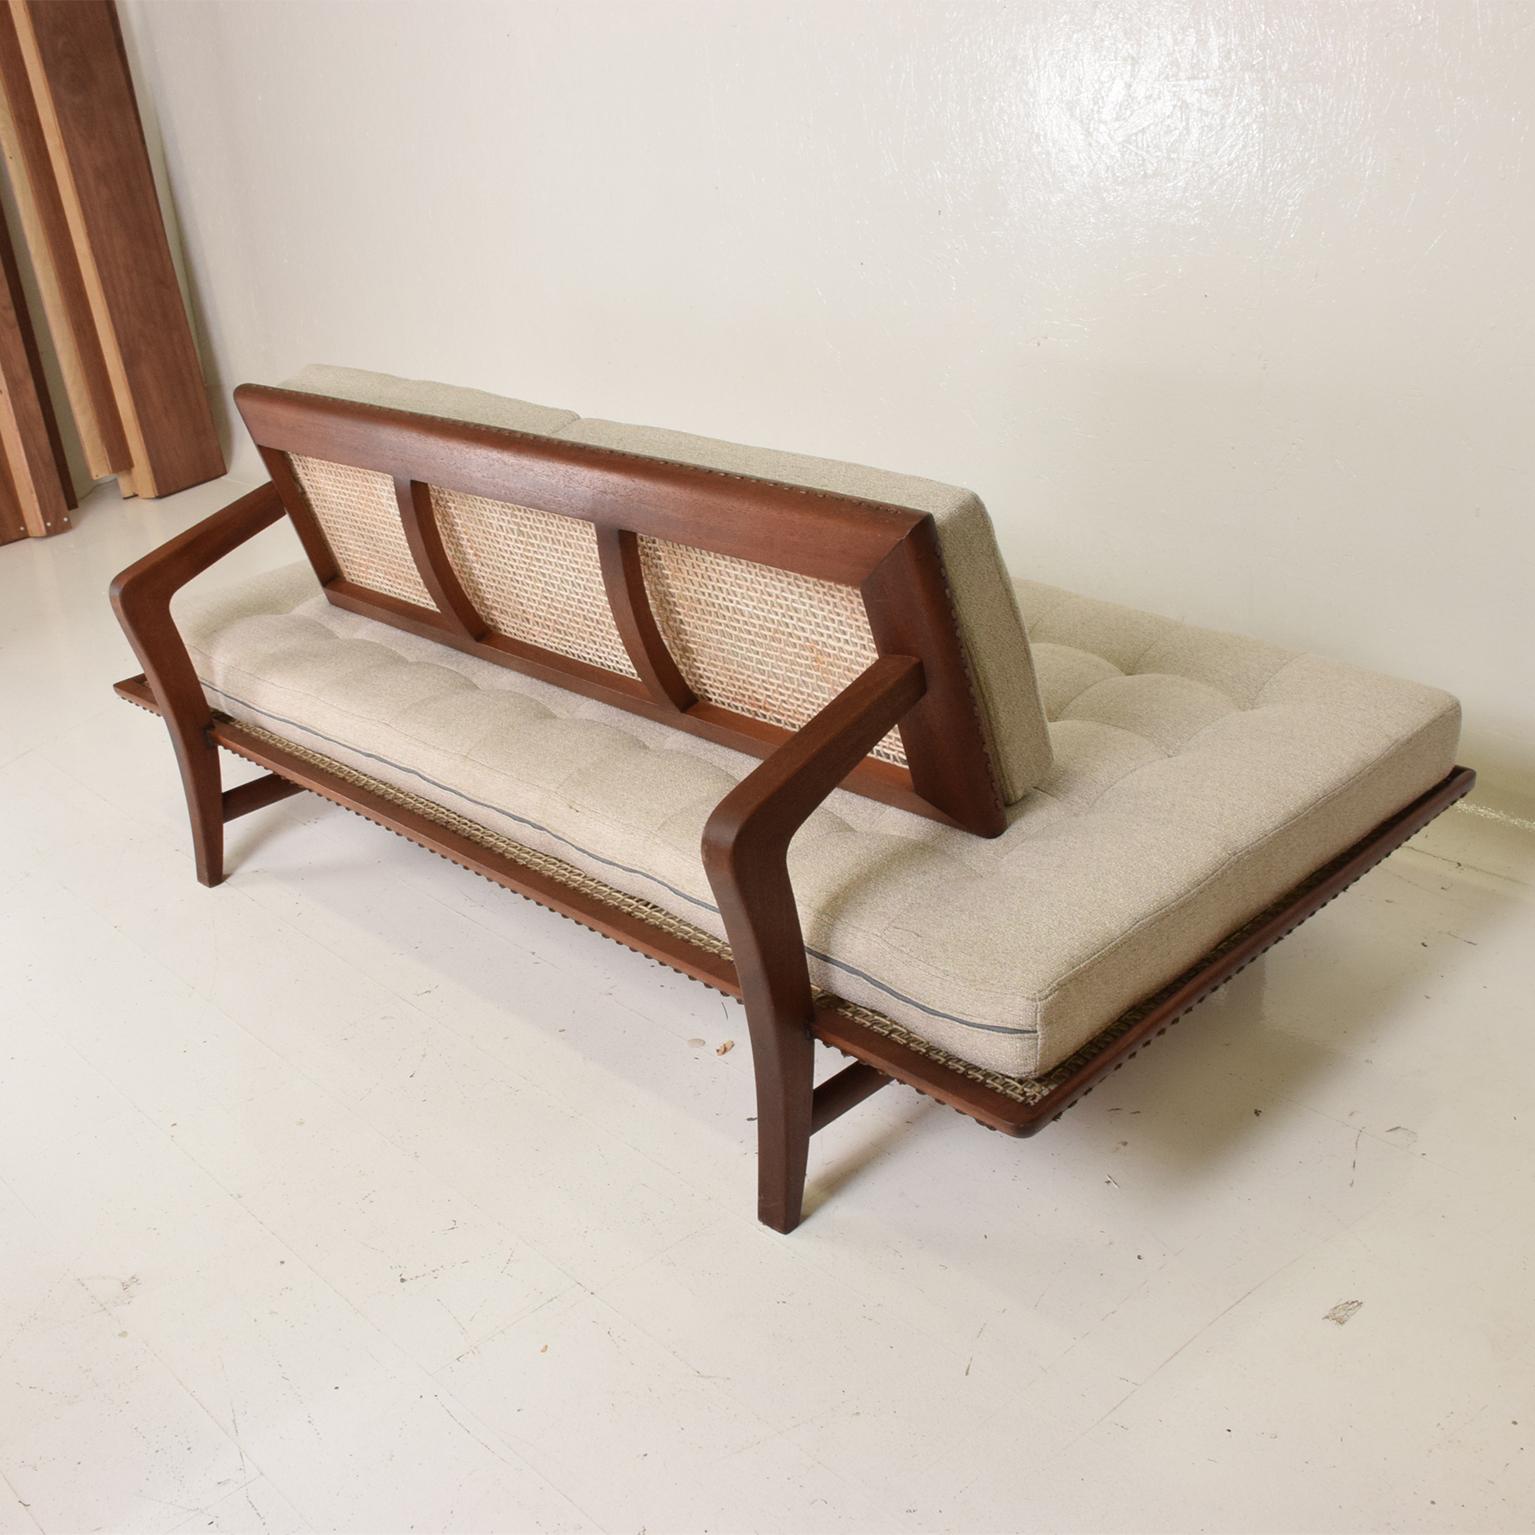 Mid-Century Modern Mexican Modernist Chaise Lounge Daybed by Charles Allen, Regil de Yucatian